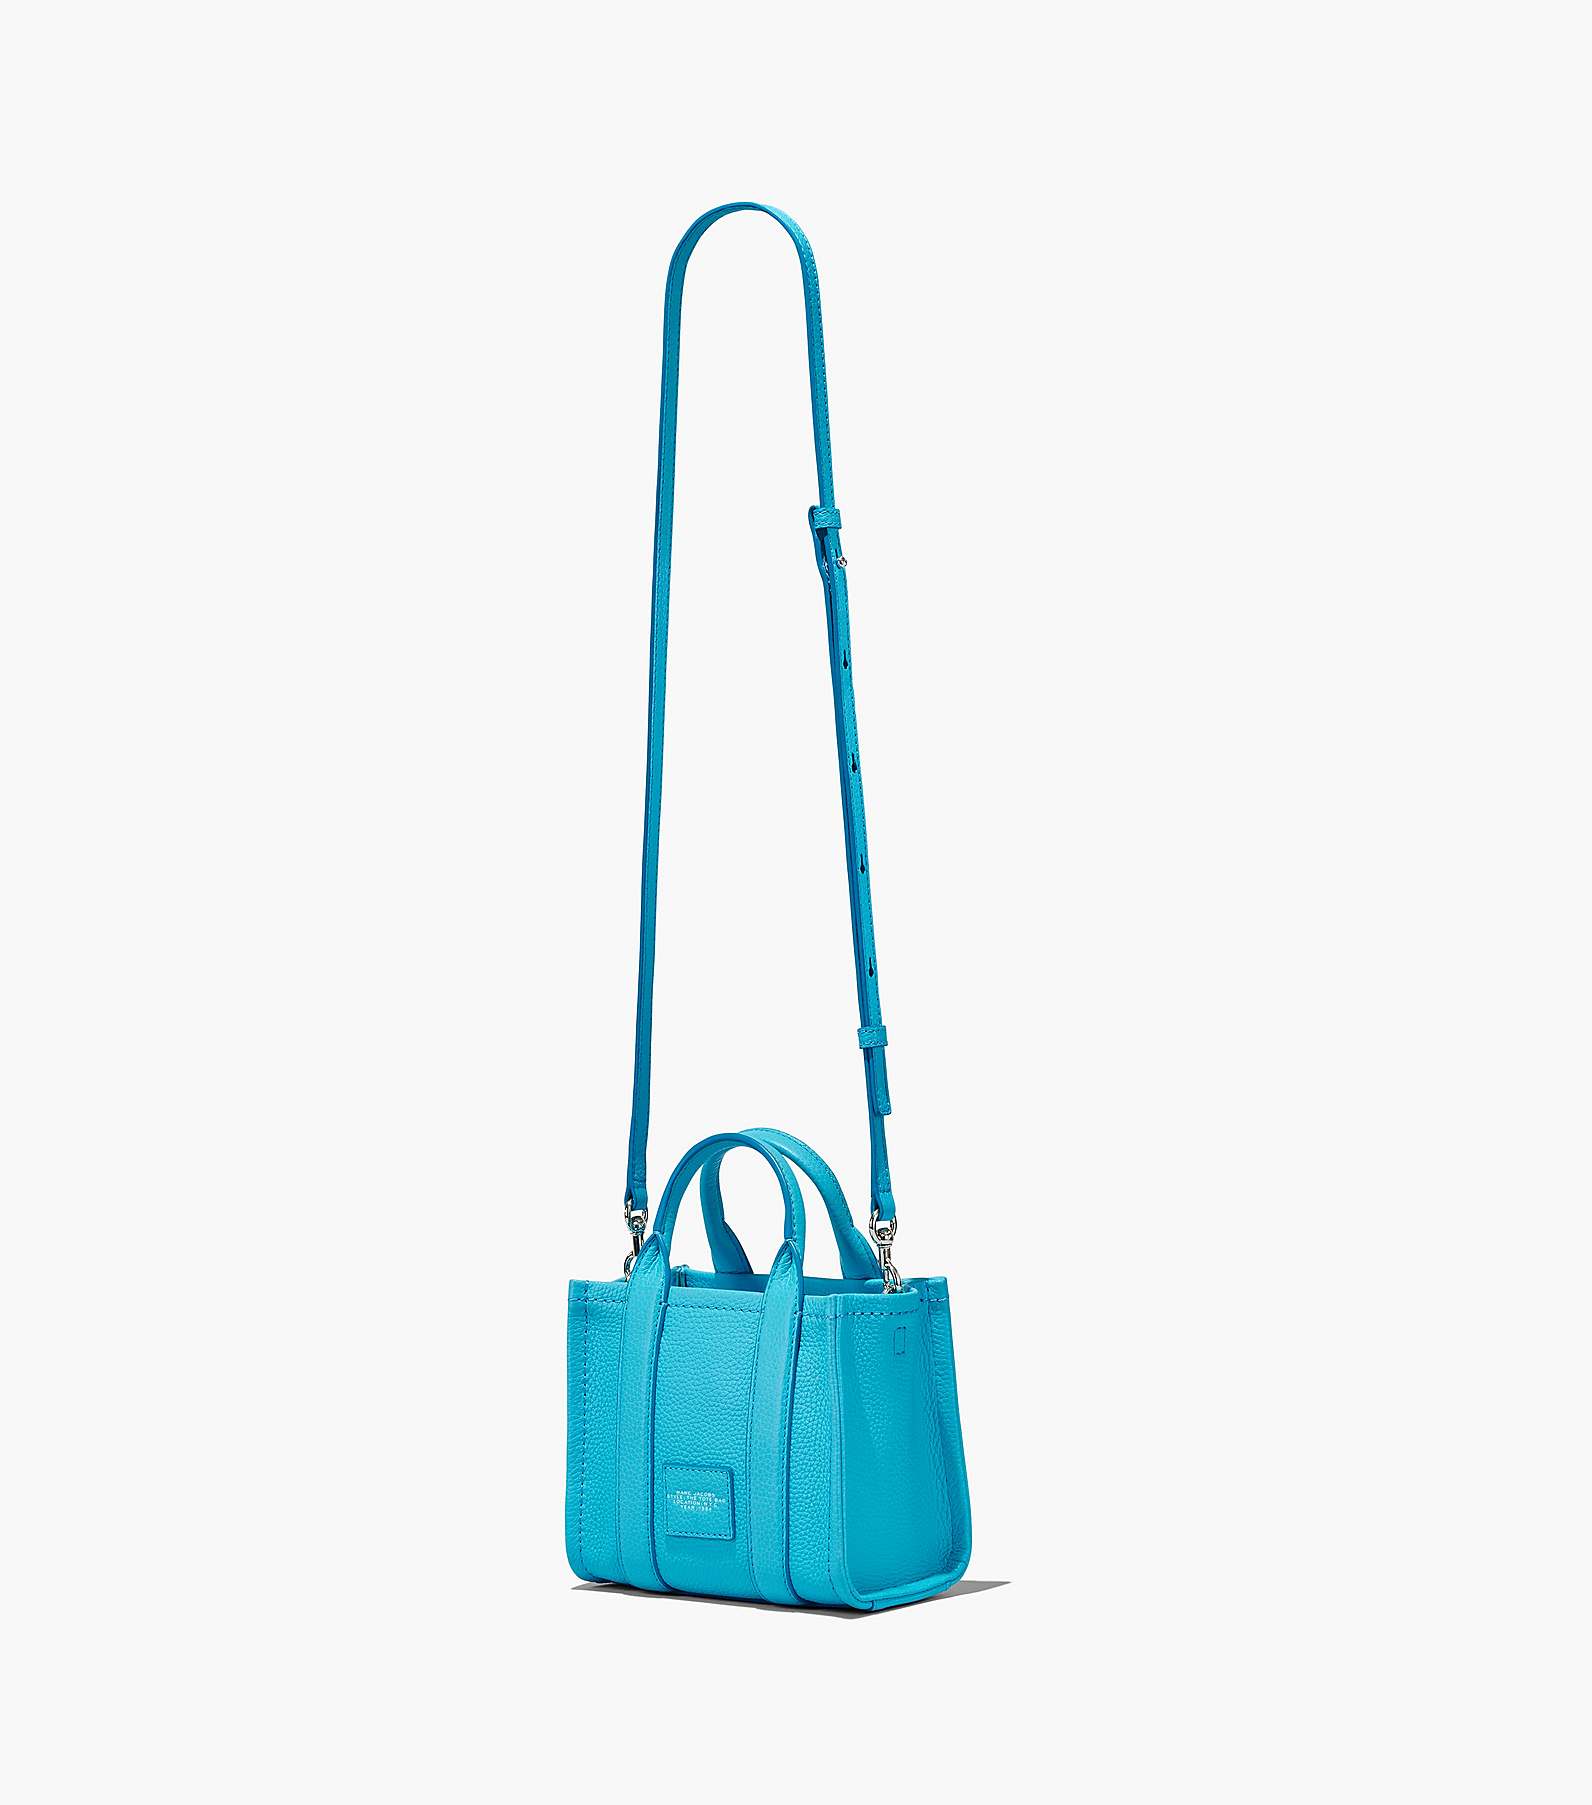 The Leather Micro Tote Bag(The Tote Bag)